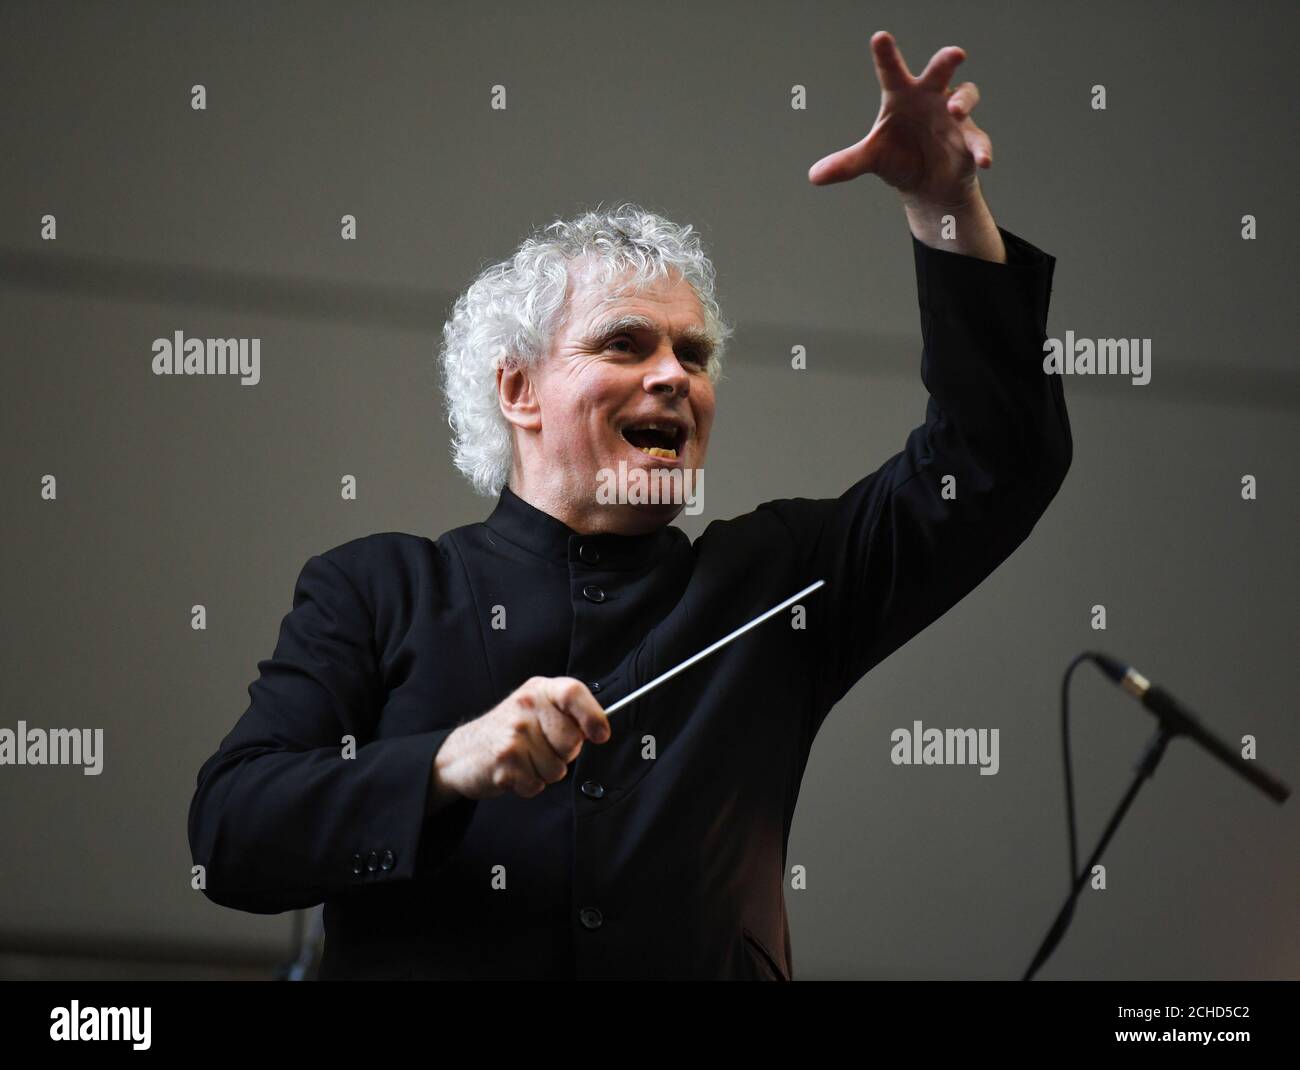 Sir Simon Rattle conducts the London Symphony Orchestra as they perform Stockhausen's Gruppen for three Orchestras in Tate Modern's Turbine Hall, London. Stock Photo